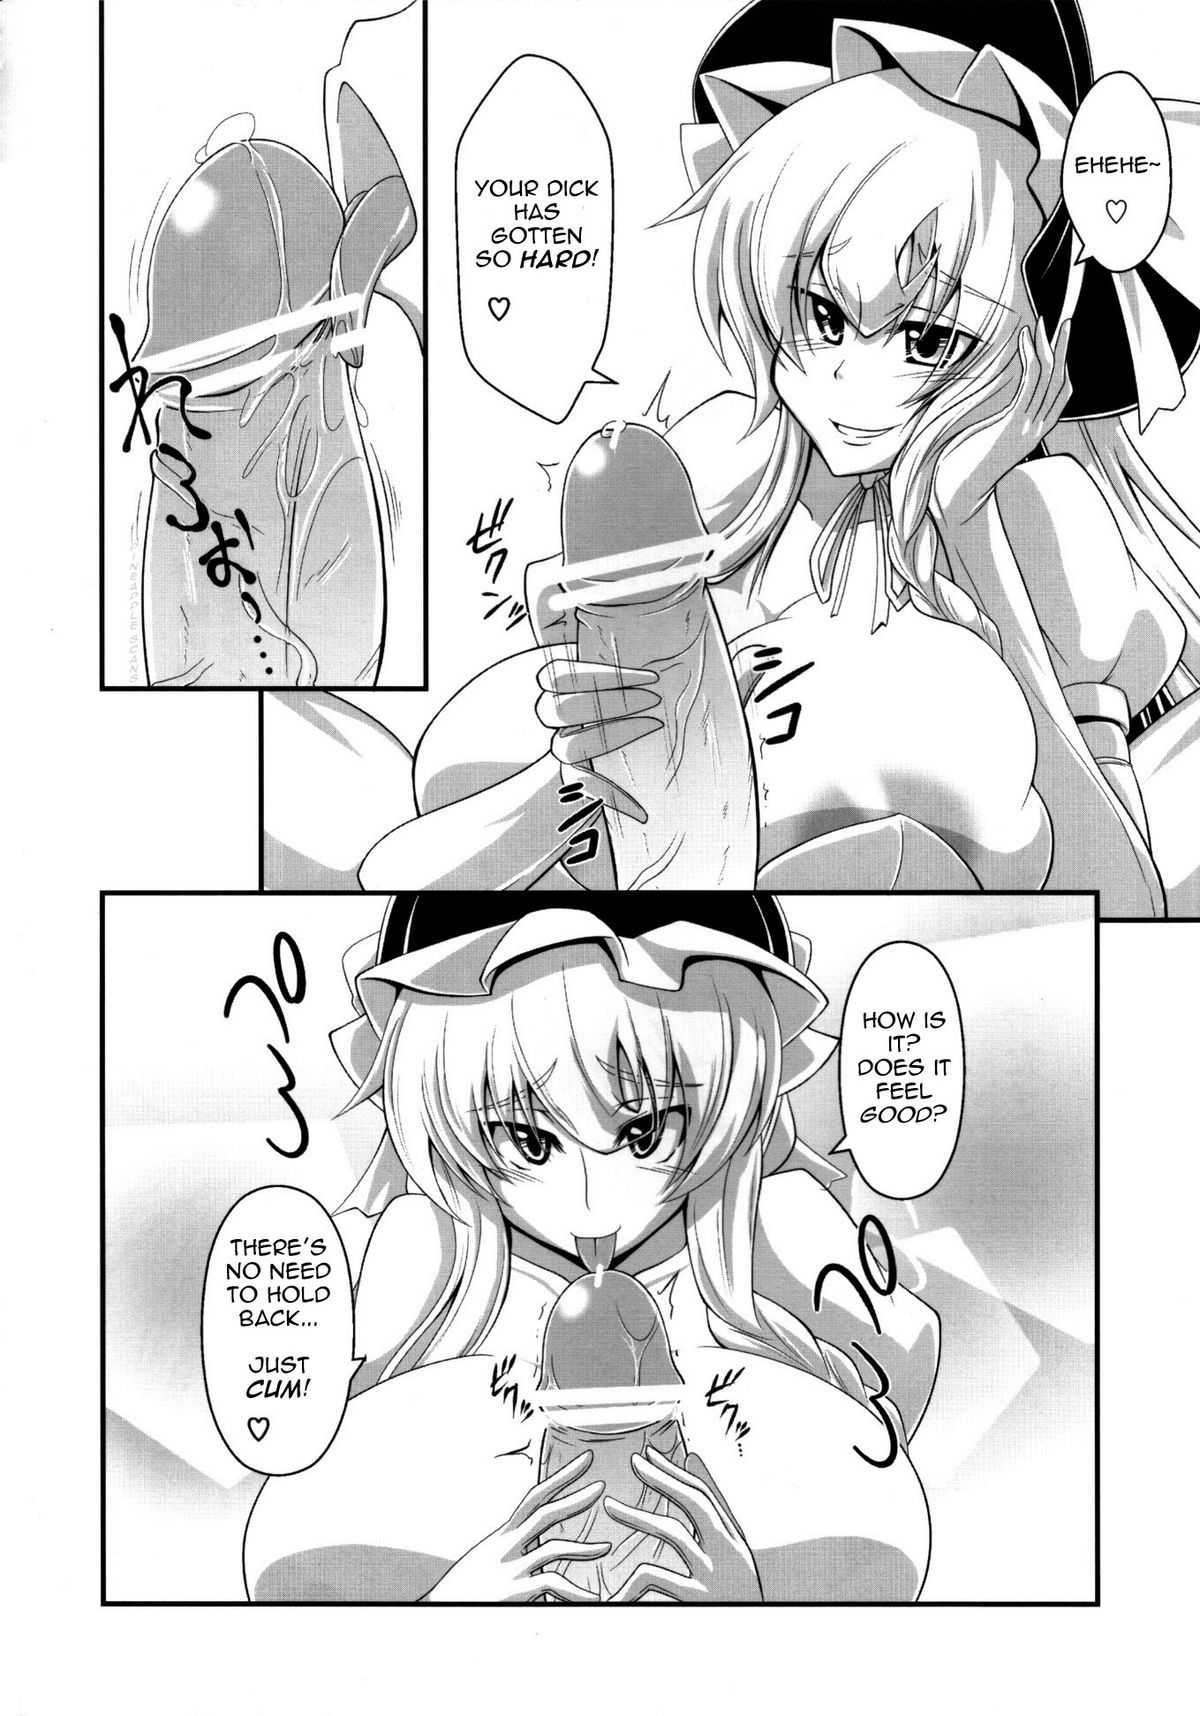 (Touhou Kouroumu 06) [Forever and ever... (Eisen)] GLAMOROUS MARISA (Touhou Project) [English] =Pineapples r Us= (東方紅楼夢 06) [Forever and ever... (英戦)] GLAMOROUS MARISA (東方Project) [英語]